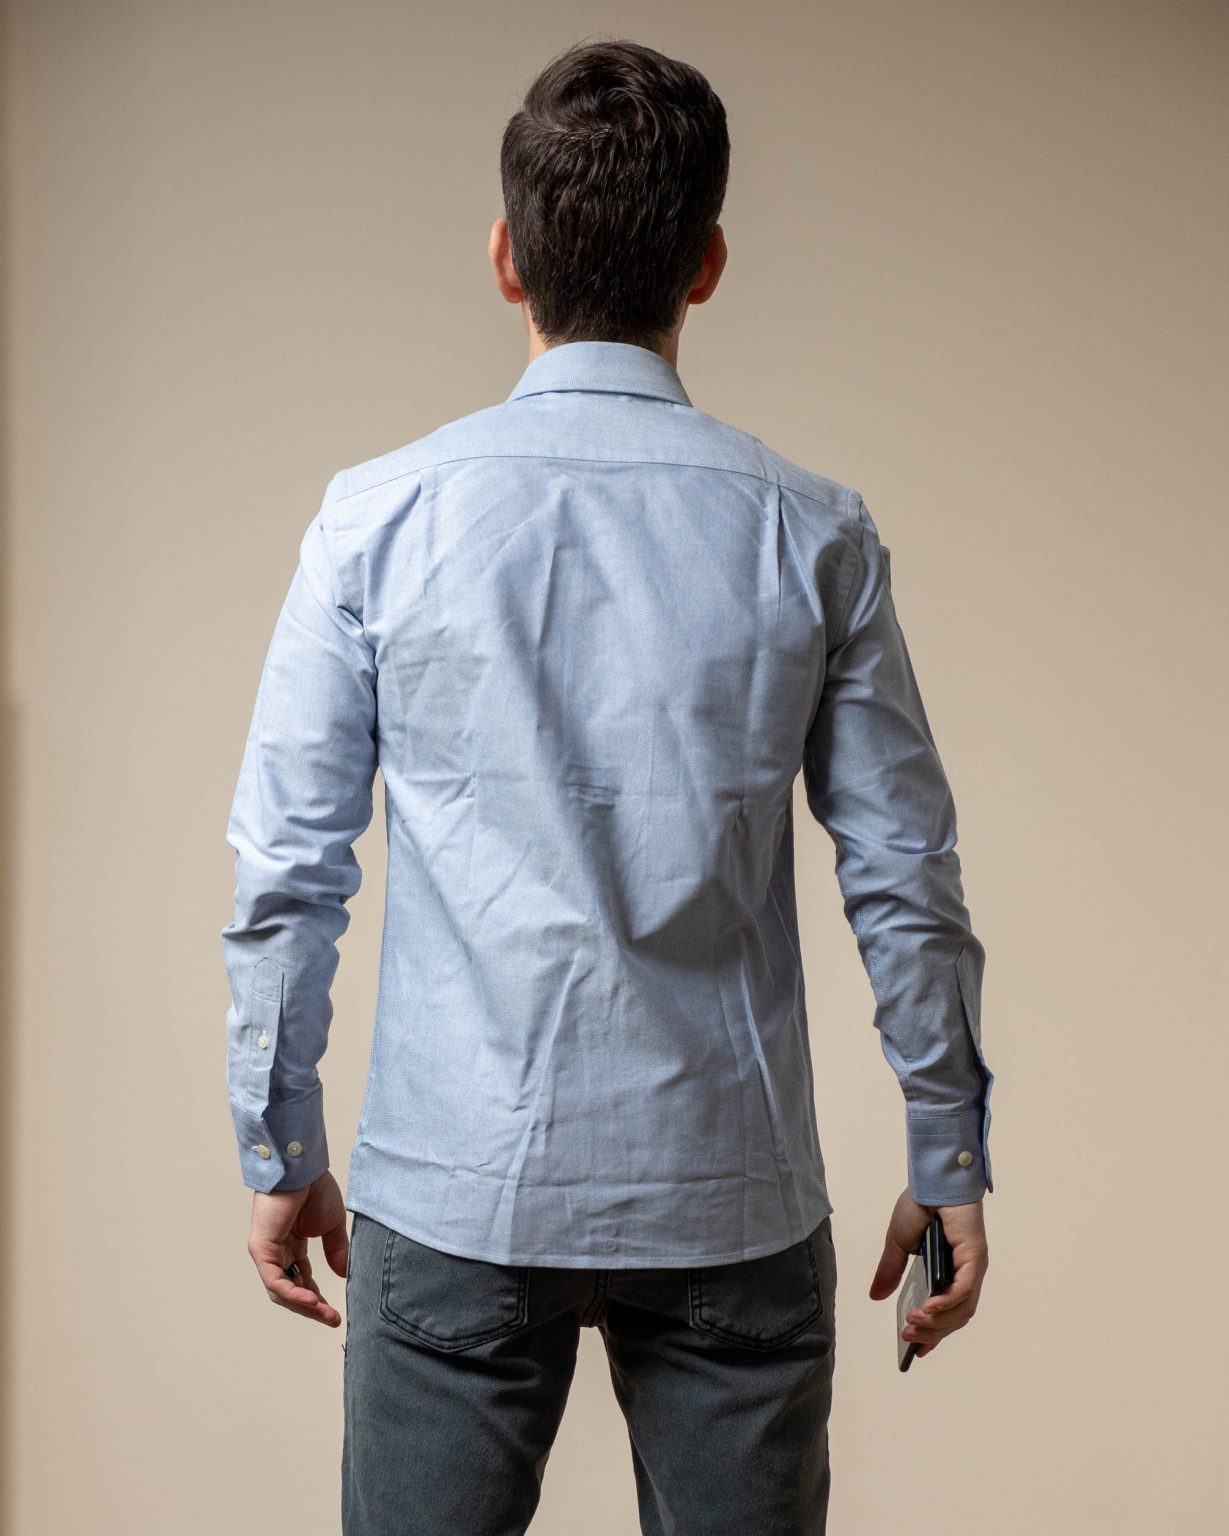 Under 510 Review: Affordable Clothes for Short Men - The Modest Man